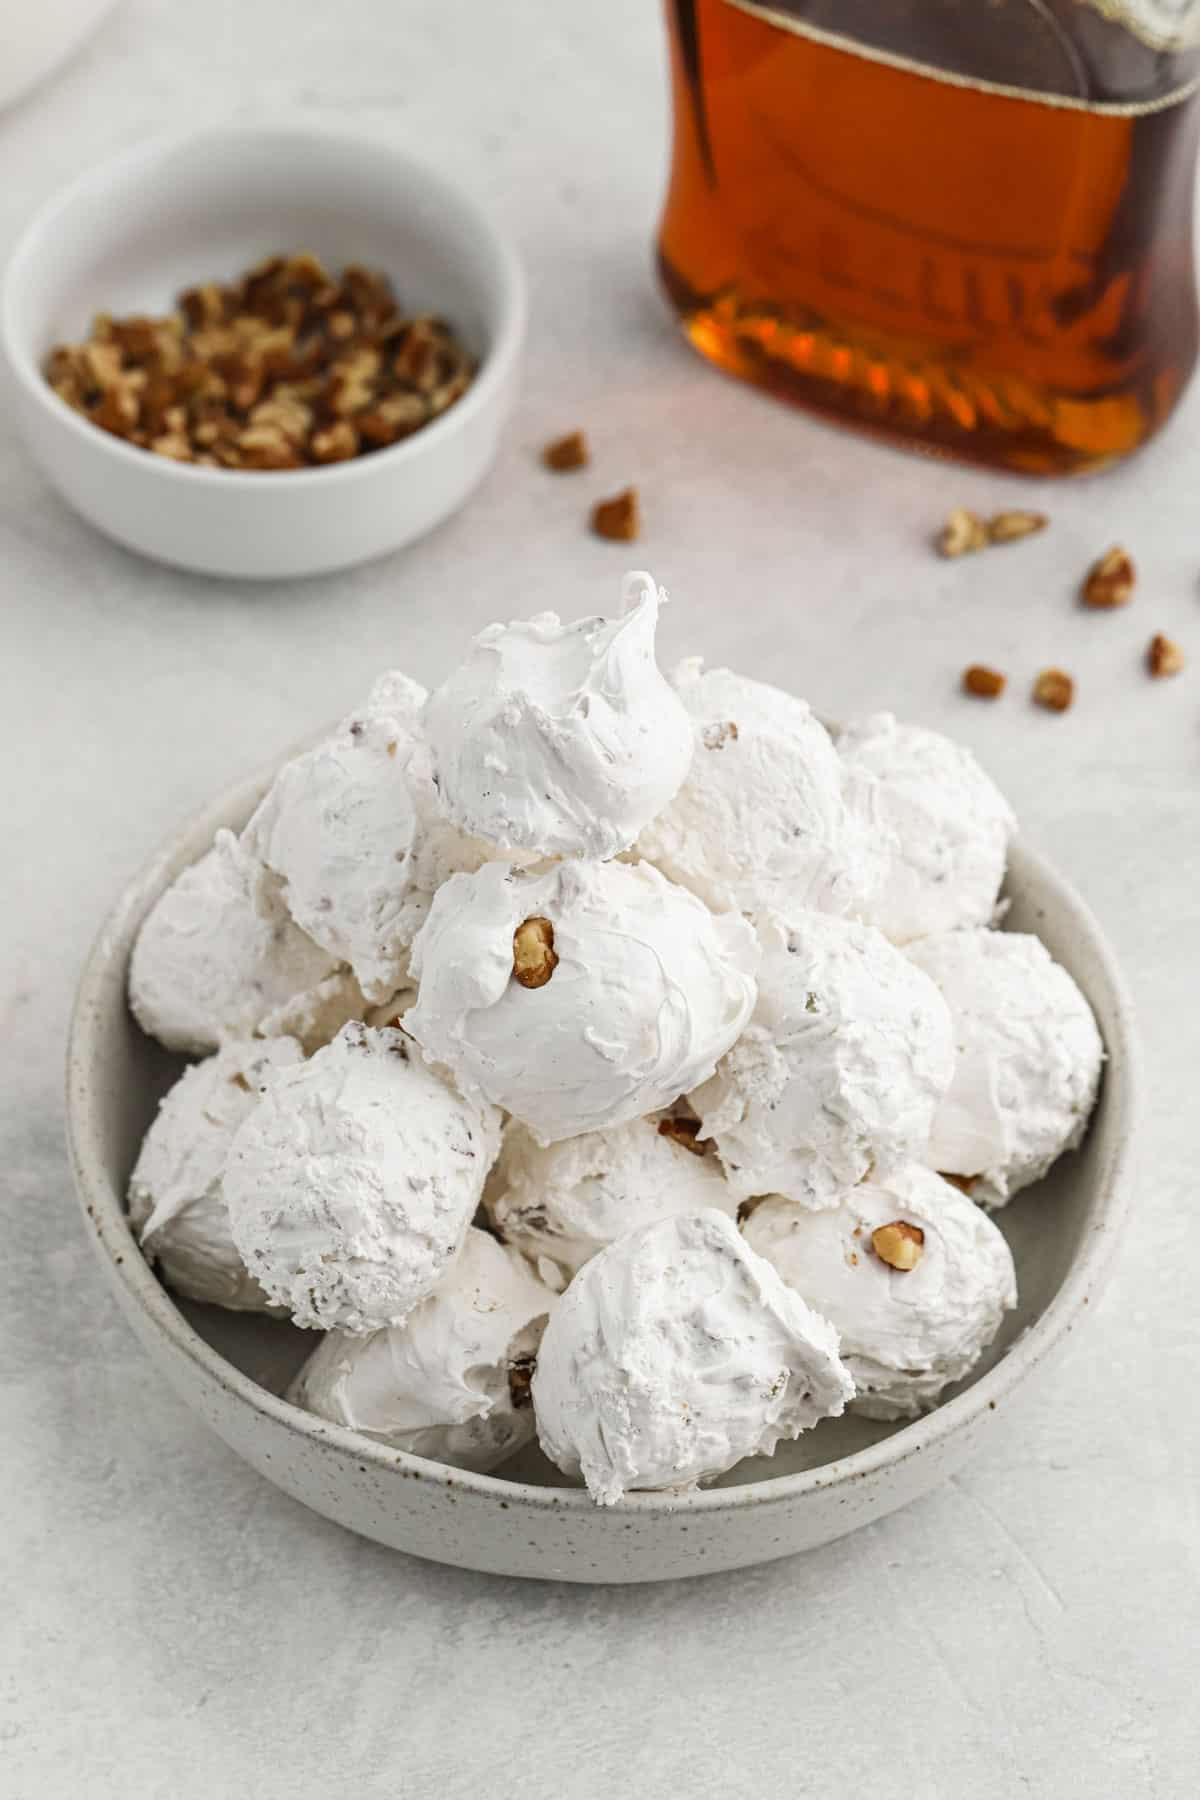 A pile of divinity candy on a grey dish with pecans and a bottle of maple syrup in the background